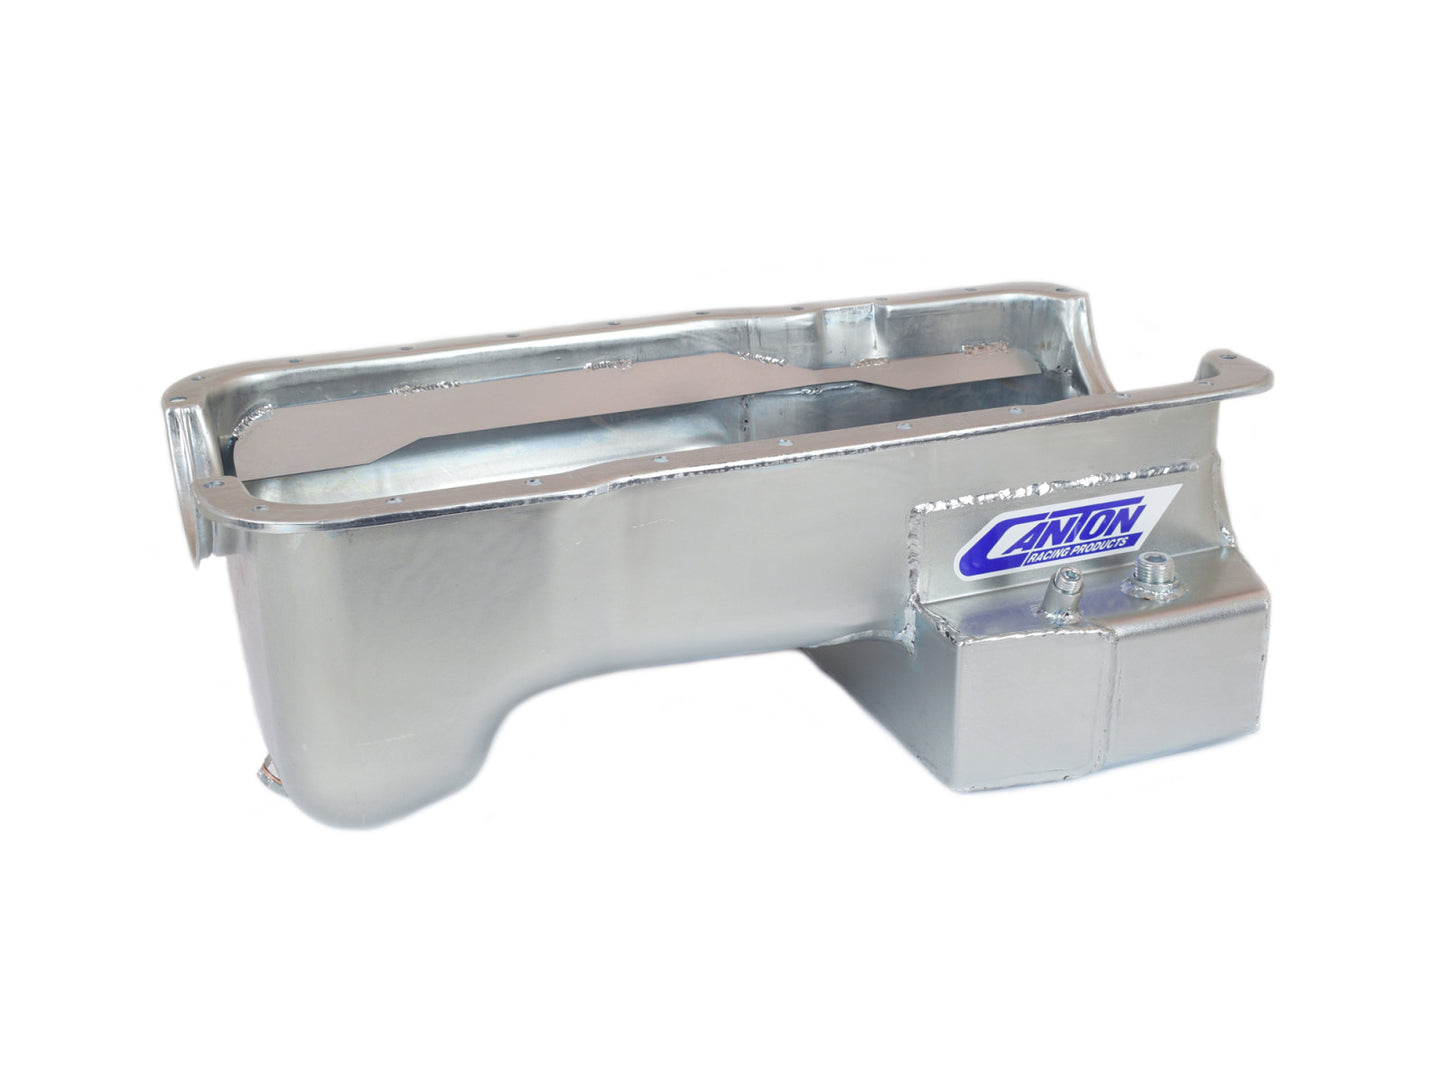 Canton 15-690 Oil Pan For Ford 351W Fox Body Mustang Rear T Sump Street Pan